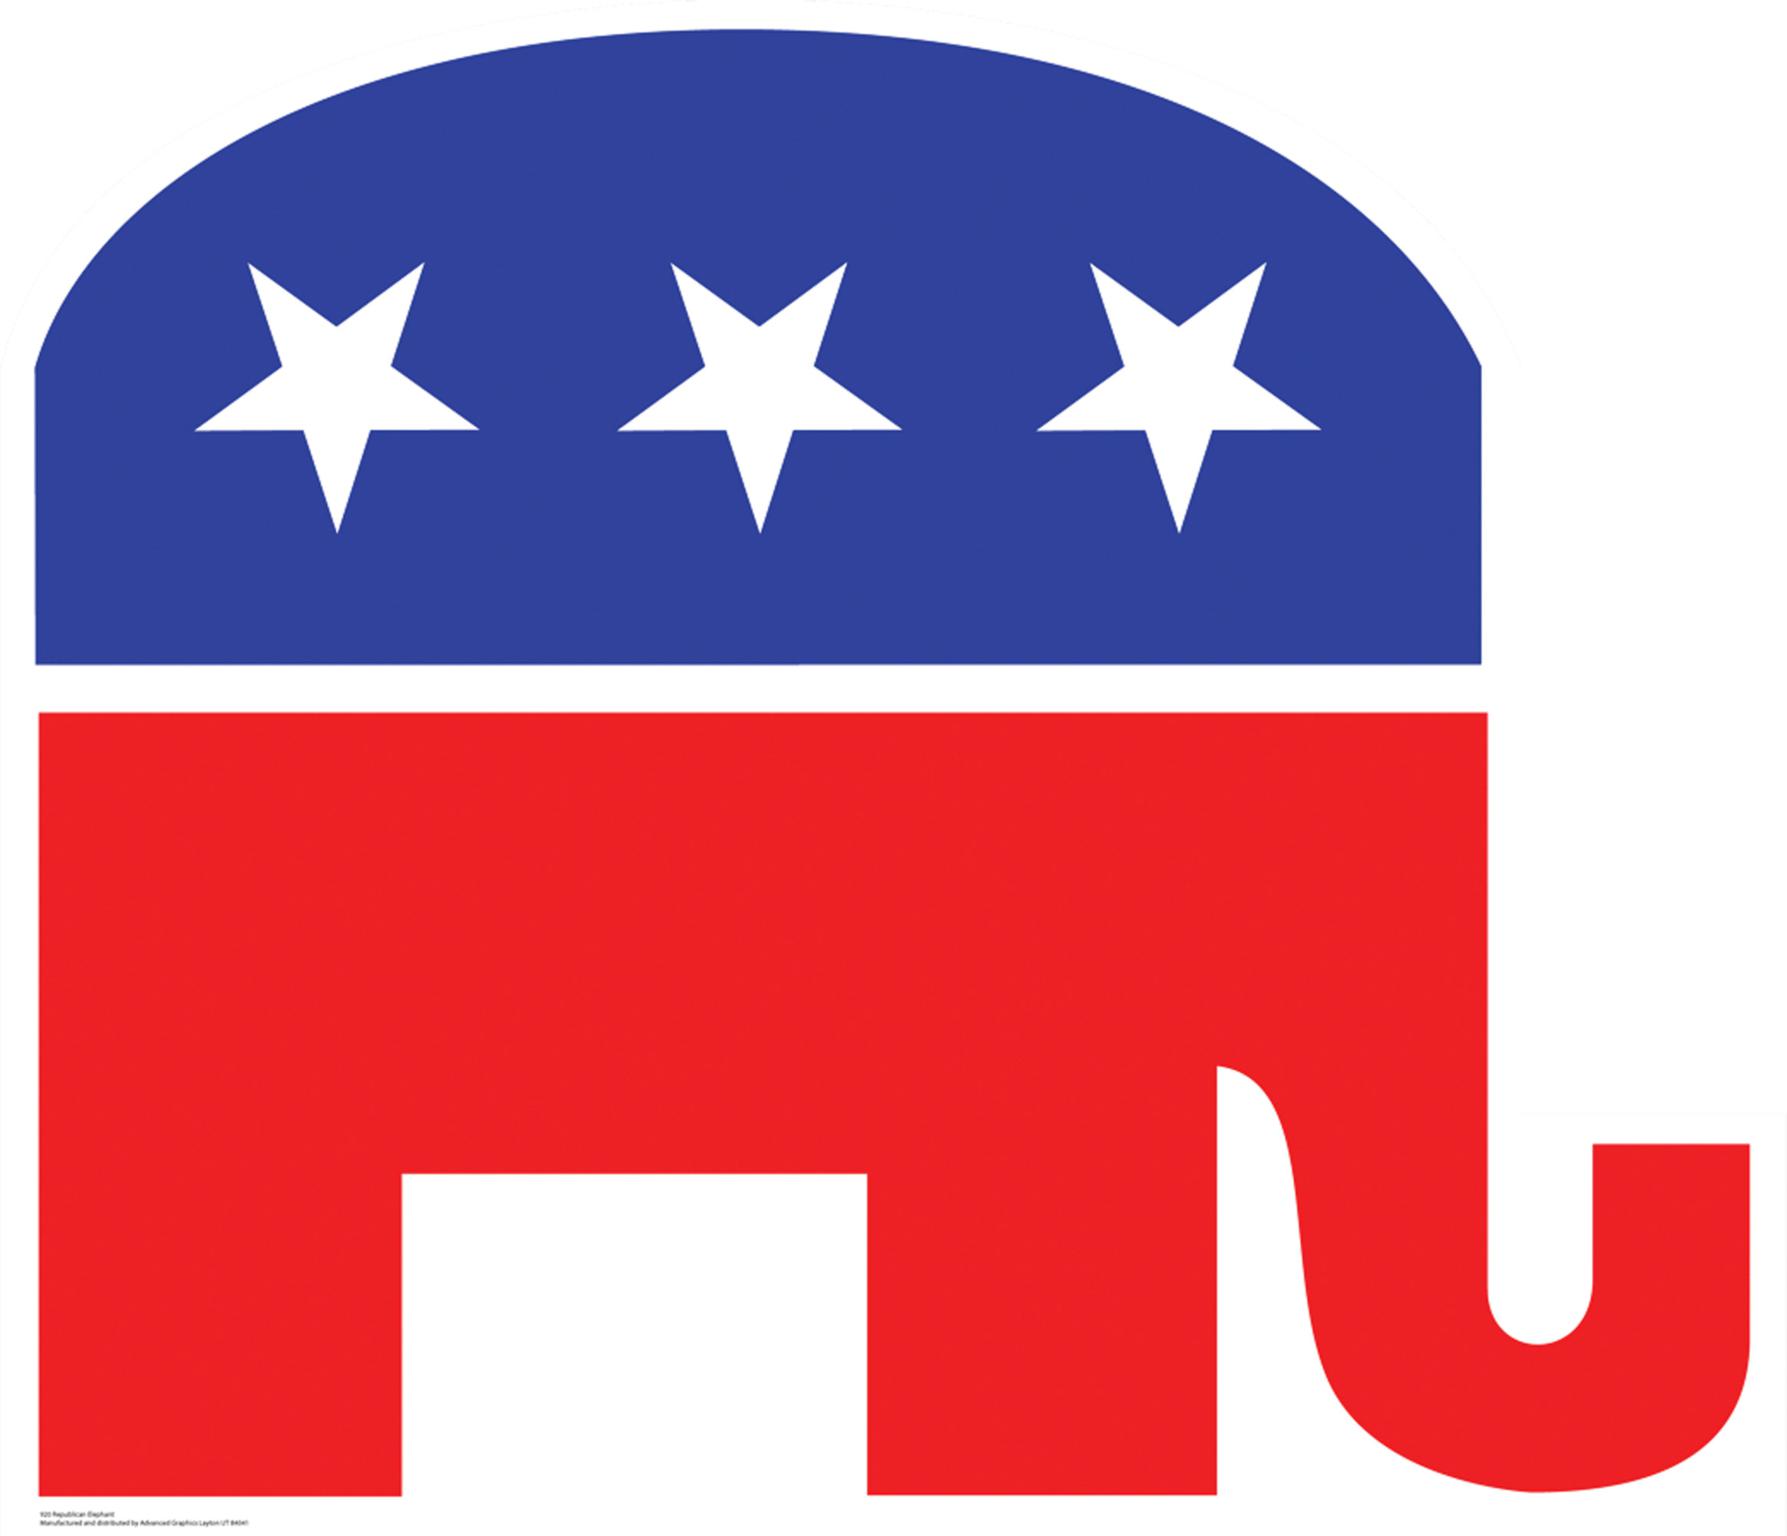 Pictures Of Republican Elephant - ClipArt Best